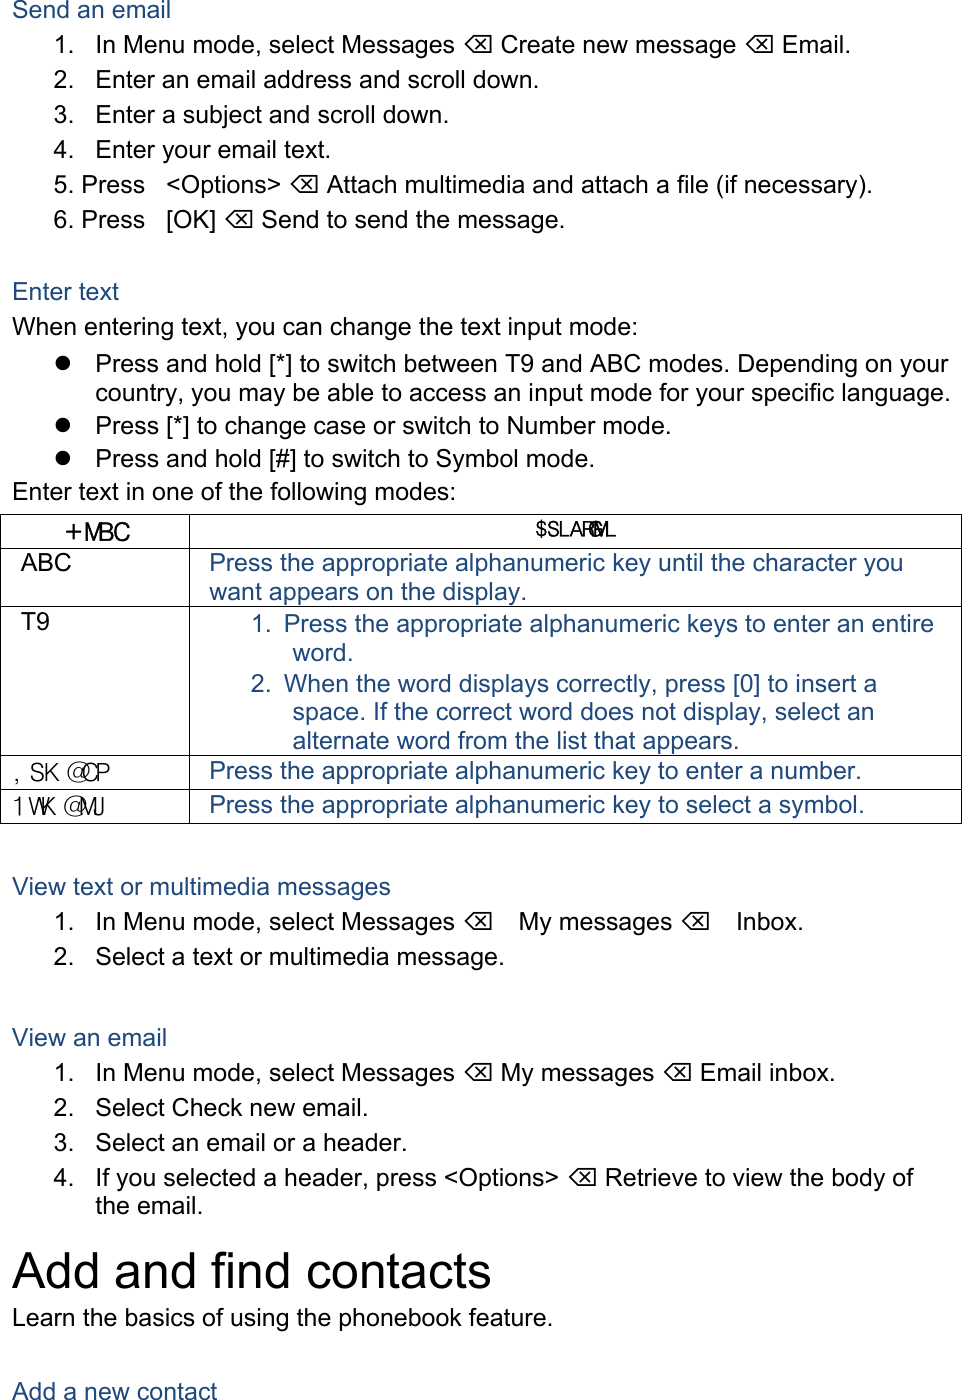 Send an email 1.  In Menu mode, select Messages  Create new message  Email. 2.  Enter an email address and scroll down. 3.  Enter a subject and scroll down. 4.  Enter your email text. 5. Press &lt;Options&gt;  Attach multimedia and attach a file (if necessary). 6. Press [OK]  Send to send the message. Enter text When entering text, you can change the text input mode:   Press and hold [*] to switch between T9 and ABC modes. Depending on your country, you may be able to access an input mode for your specific language.   Press [*] to change case or switch to Number mode.   Press and hold [#] to switch to Symbol mode. Enter text in one of the following modes: +MBC $SLARGMLABC  Press the appropriate alphanumeric key until the character you want appears on the display. T9  1.  Press the appropriate alphanumeric keys to enter an entire word. 2.  When the word displays correctly, press [0] to insert a space. If the correct word does not display, select an alternate word from the list that appears. ,SK@CP Press the appropriate alphanumeric key to enter a number. 1WK@MJ Press the appropriate alphanumeric key to select a symbol. View text or multimedia messages 1.  In Menu mode, select Messages My messages Inbox. 2.  Select a text or multimedia message.  View an email 1.  In Menu mode, select Messages  My messages  Email inbox. 2.  Select Check new email. 3.  Select an email or a header. 4.  If you selected a header, press &lt;Options&gt;  Retrieve to view the body of the email. Add and find contacts Learn the basics of using the phonebook feature.  Add a new contact 